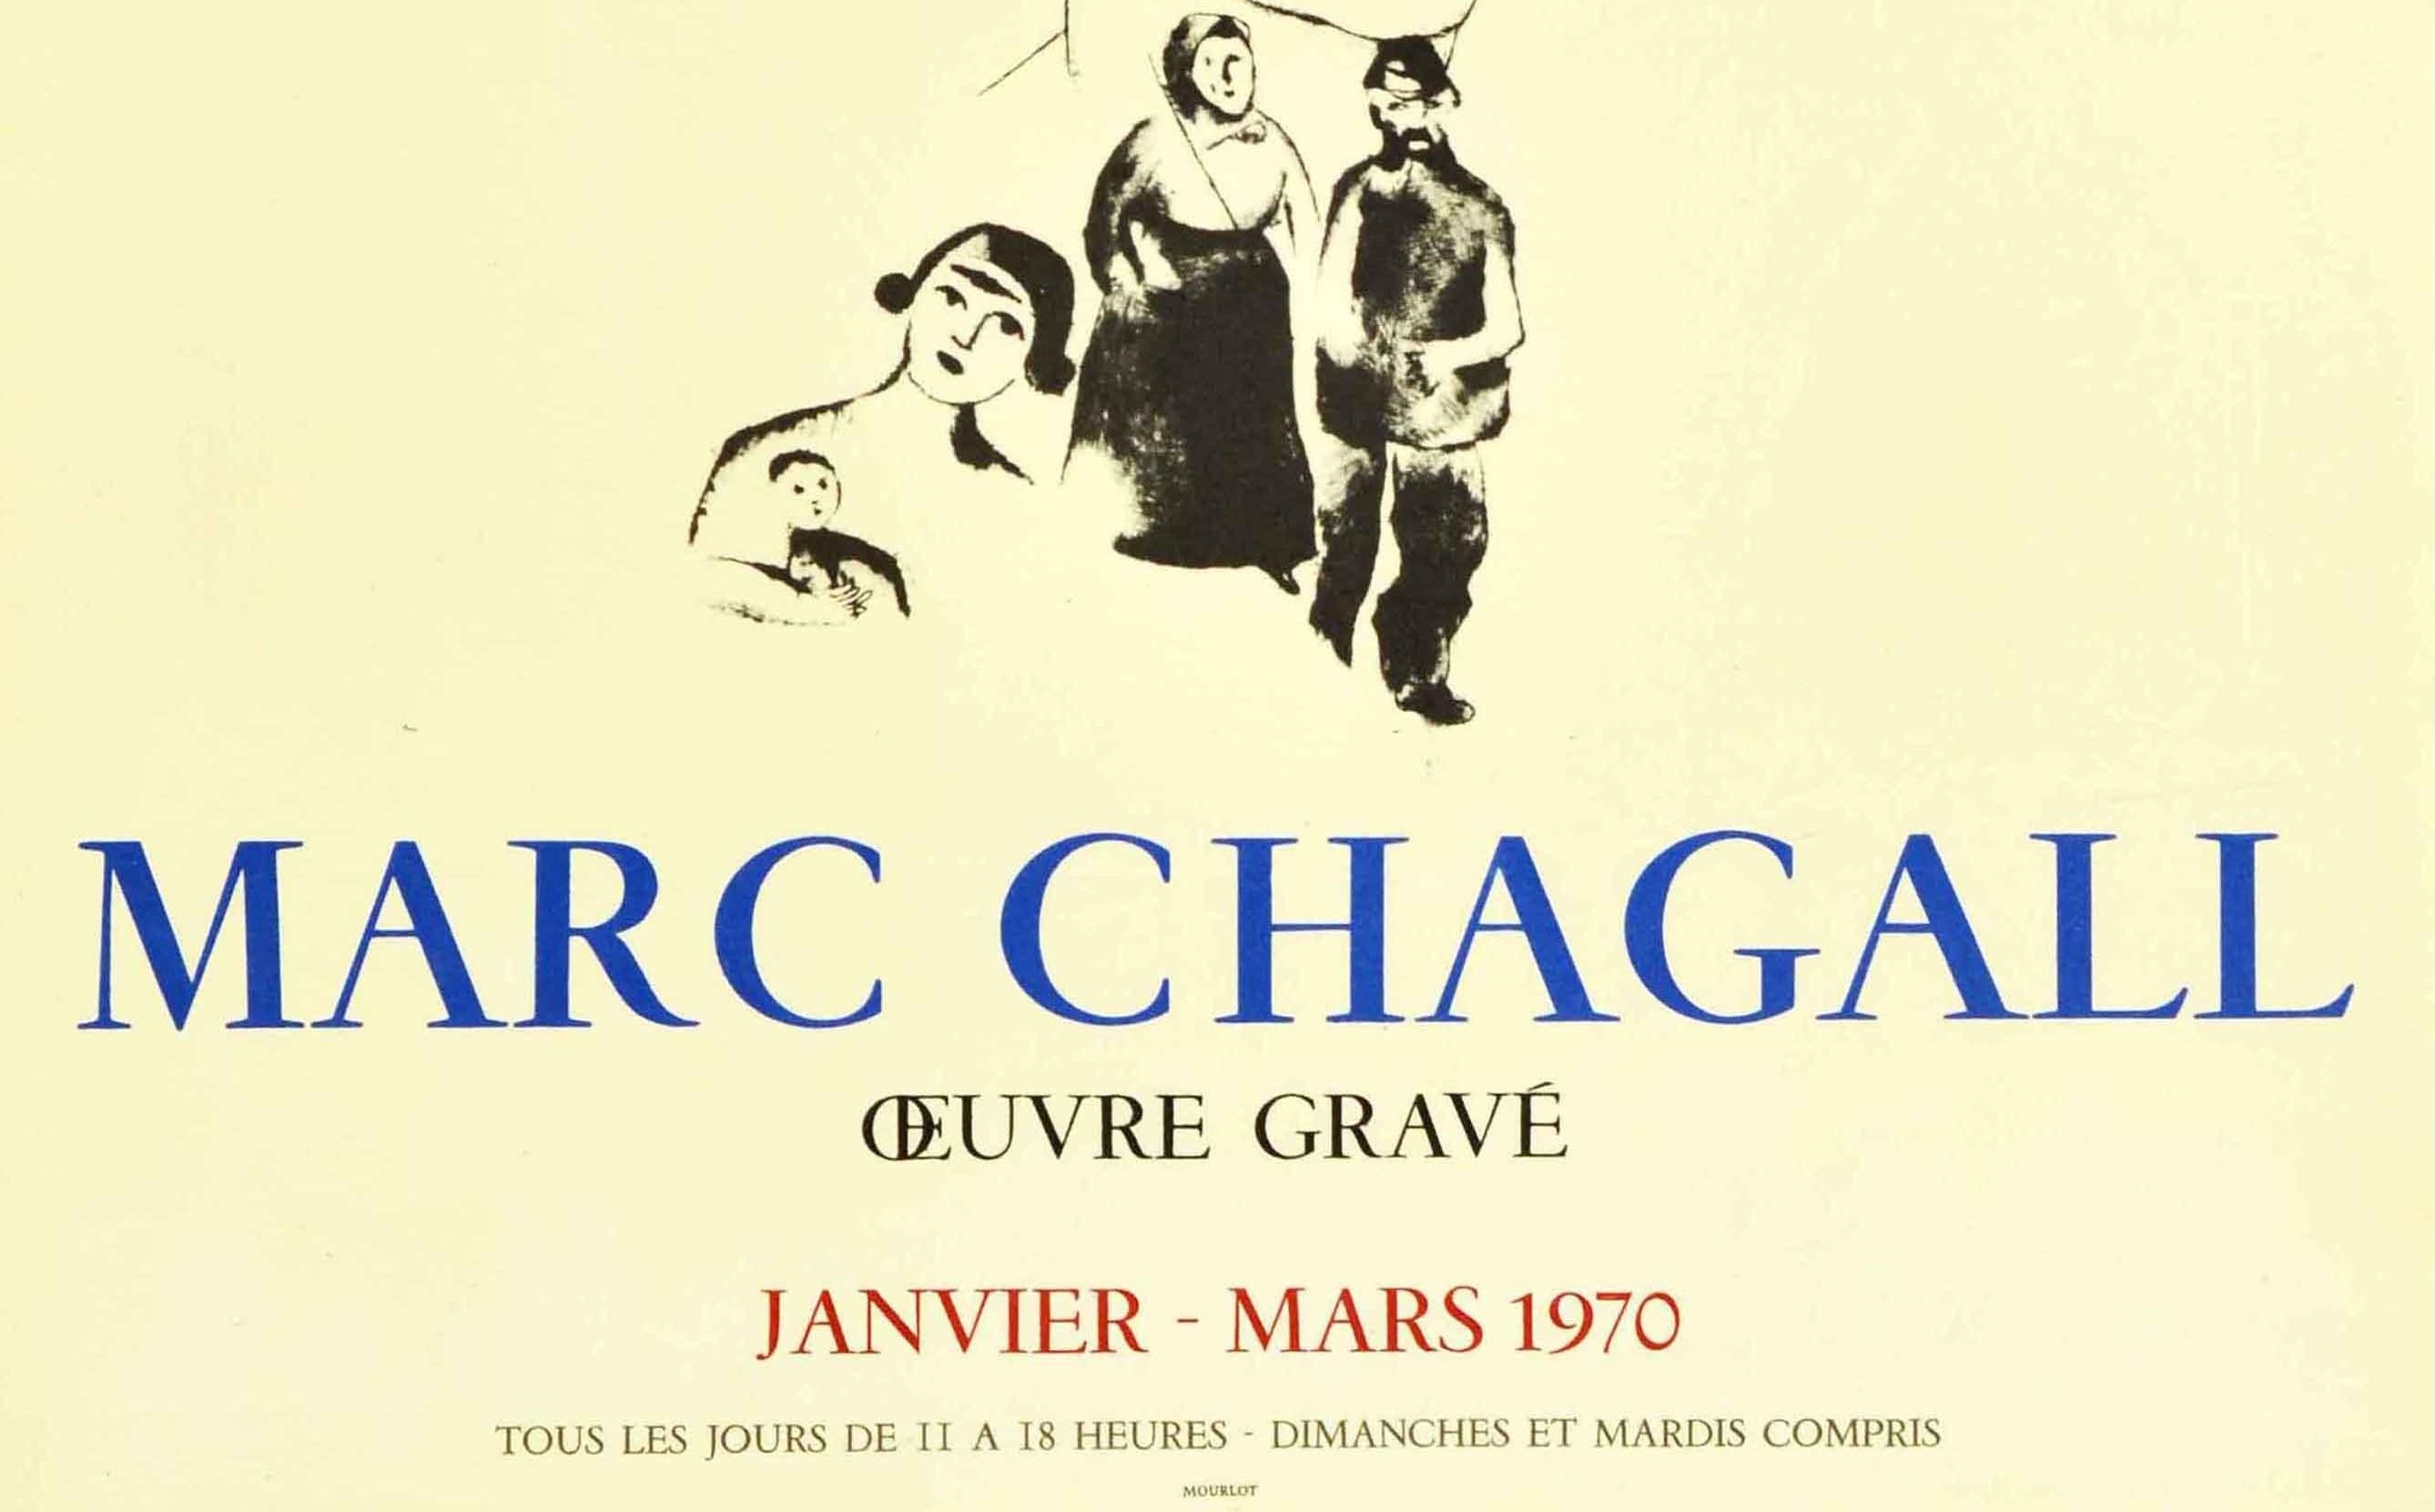 Original vintage advertising poster for an art exhibition of Engraved Work by the notable artist Marc Chagall (1887-1985) L'oeuvre Grave held at the National Library / Bibliotheque Nationale Paris from January to March 1970 featuring Chagall's 1922